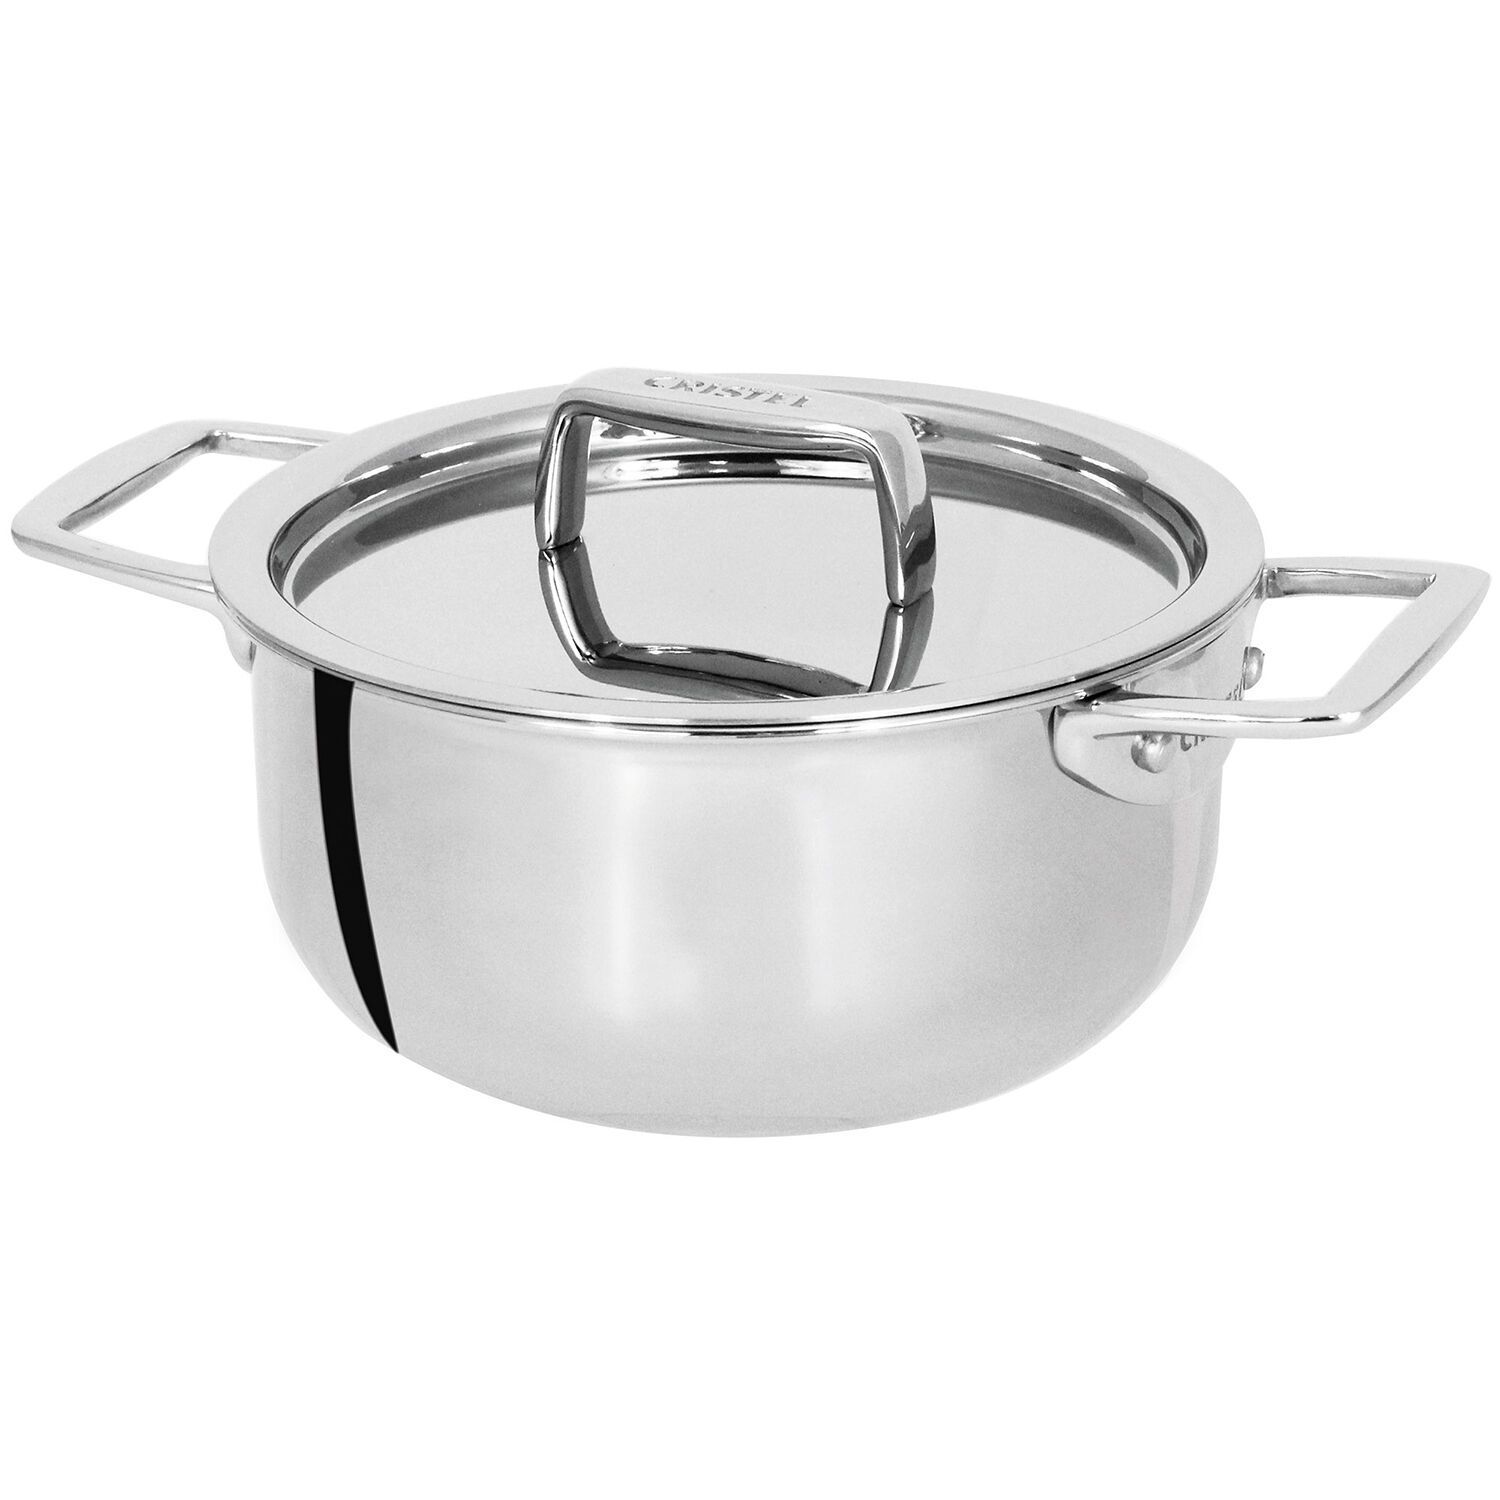 Castel’Pro 5-Ply Mini Stewpots with Stainless Steel Lid